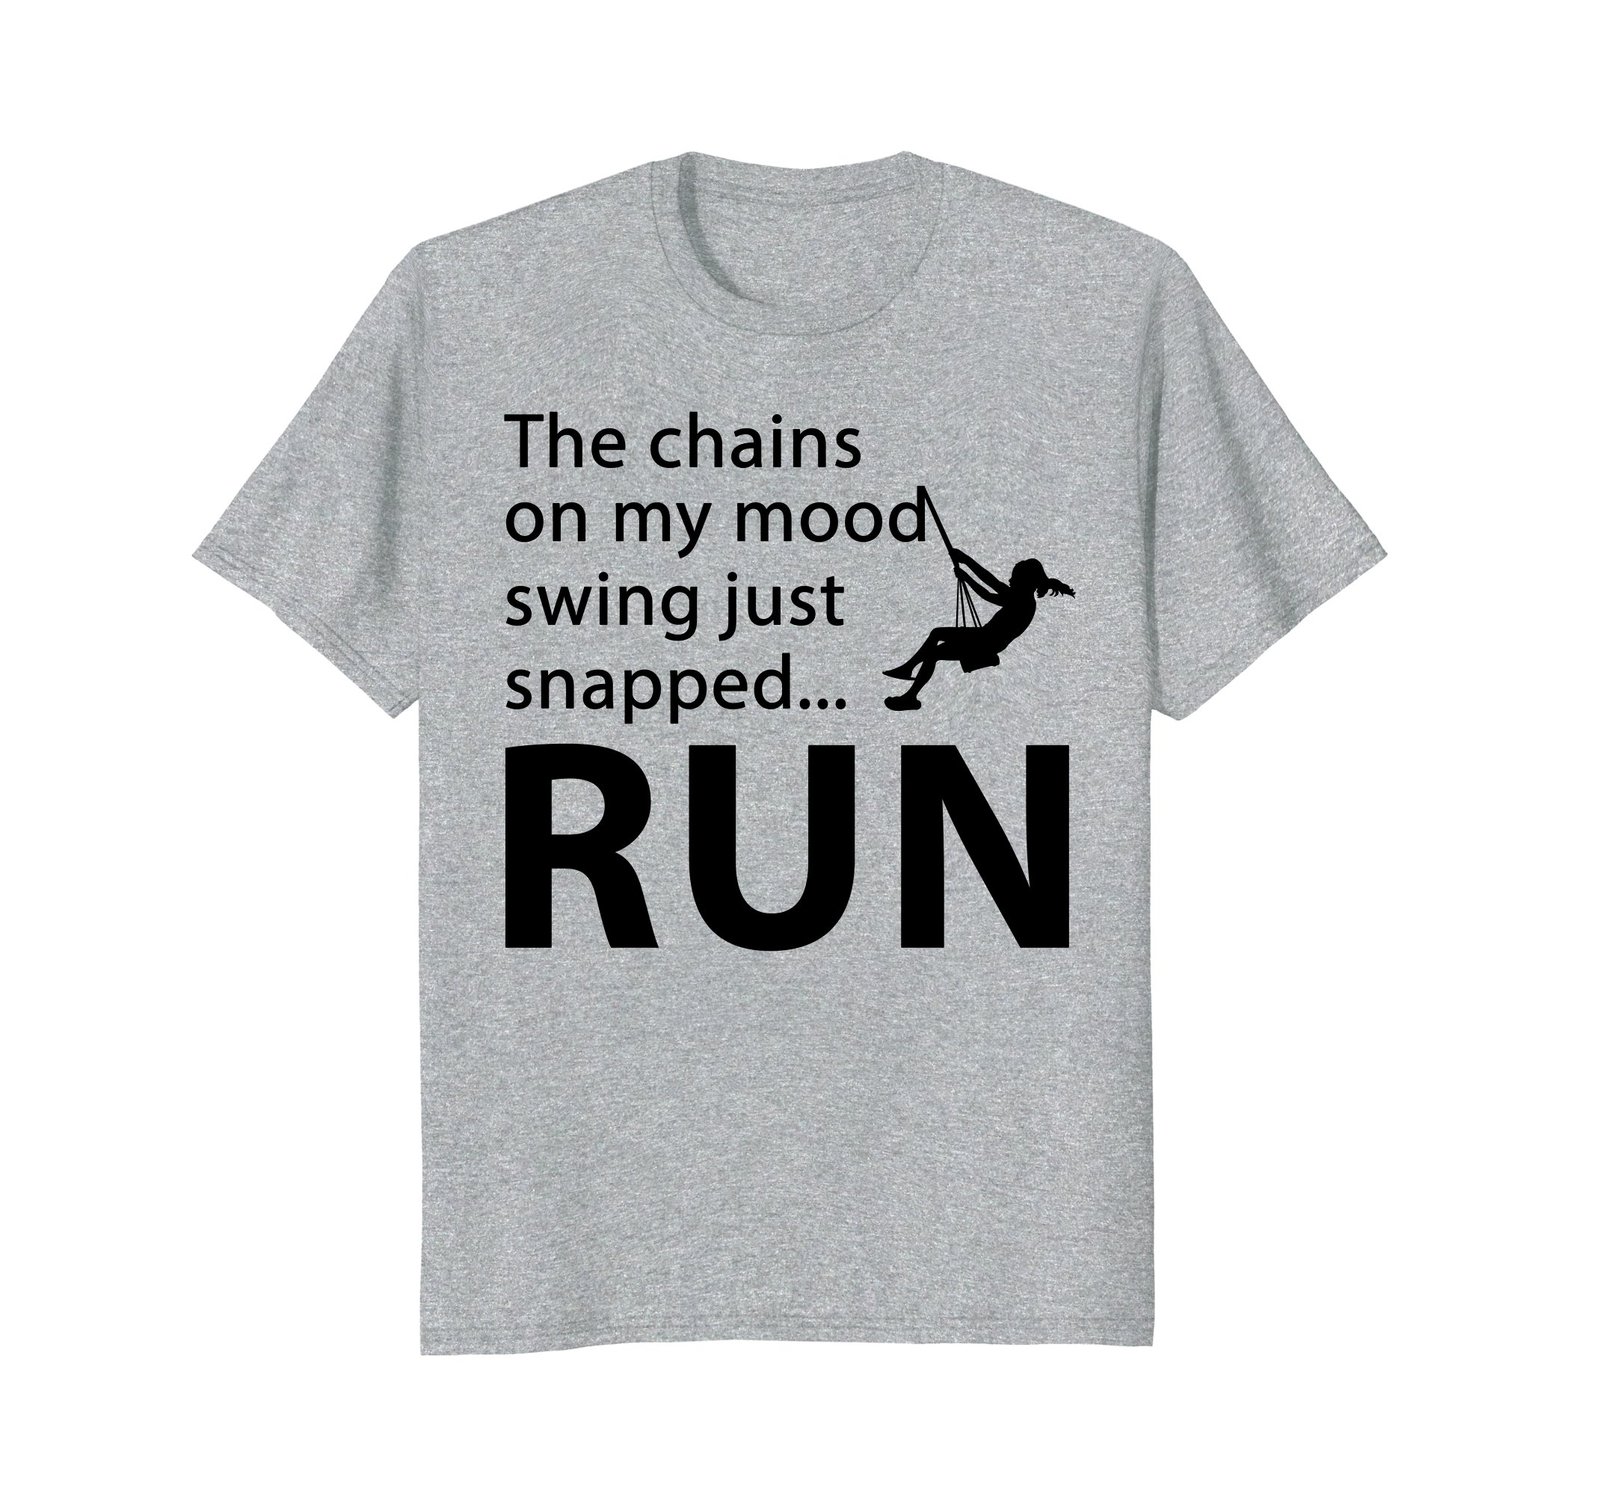 Funny Shirts - The Chains On My Mood Swing Just Snapped RUN T-shirt Men ...